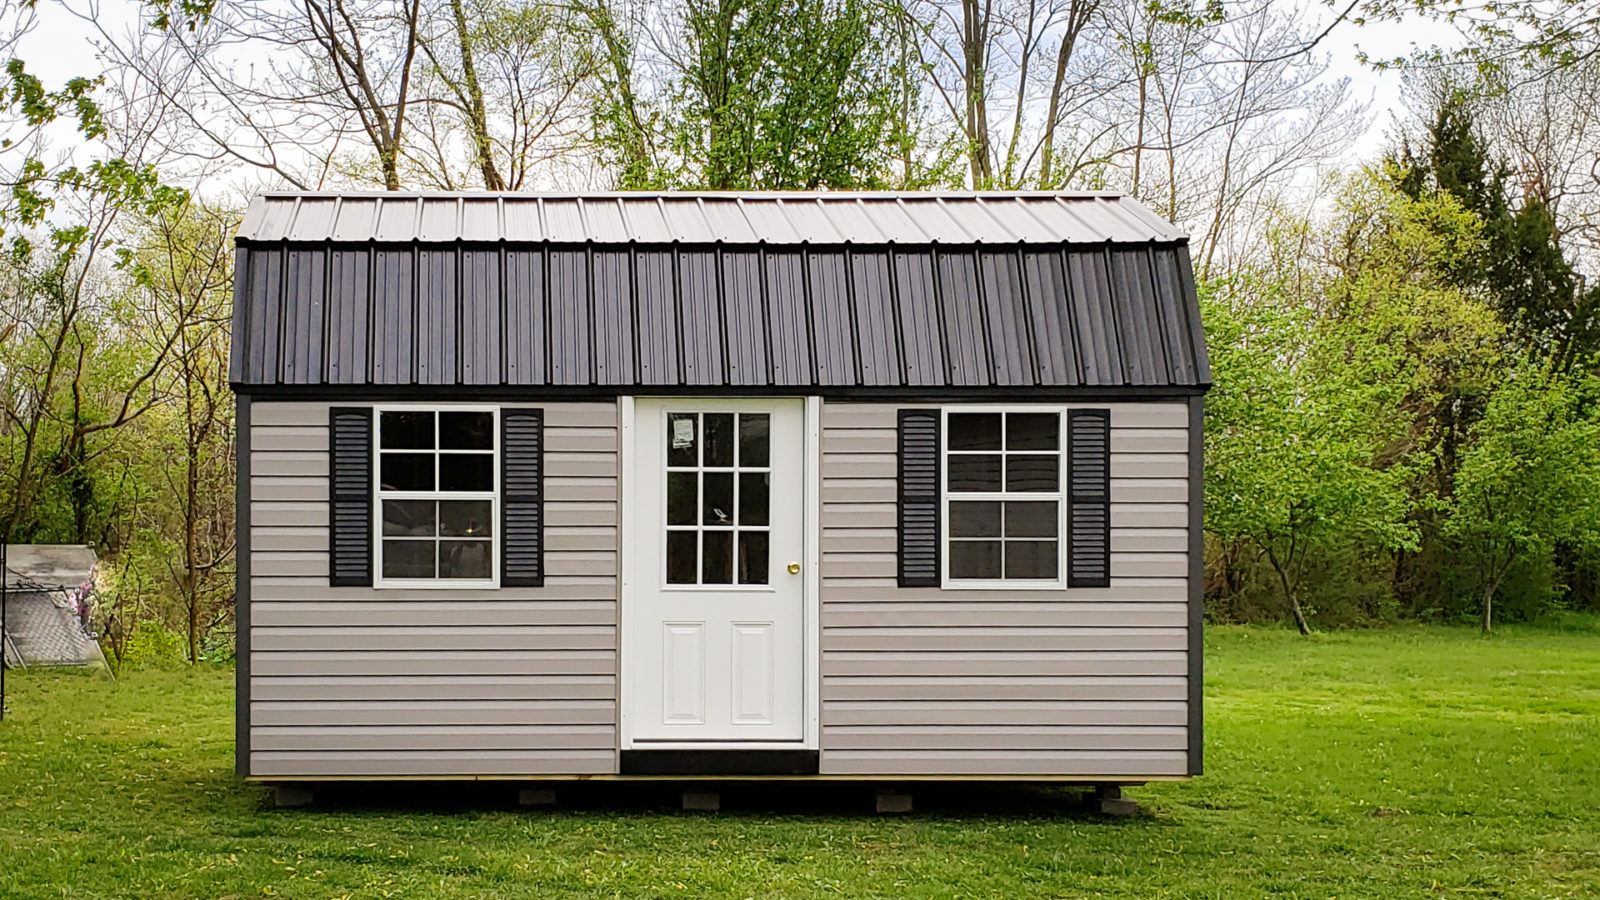 exterior of brown and white shed for sale in KY and TN for outdoor shed cost article